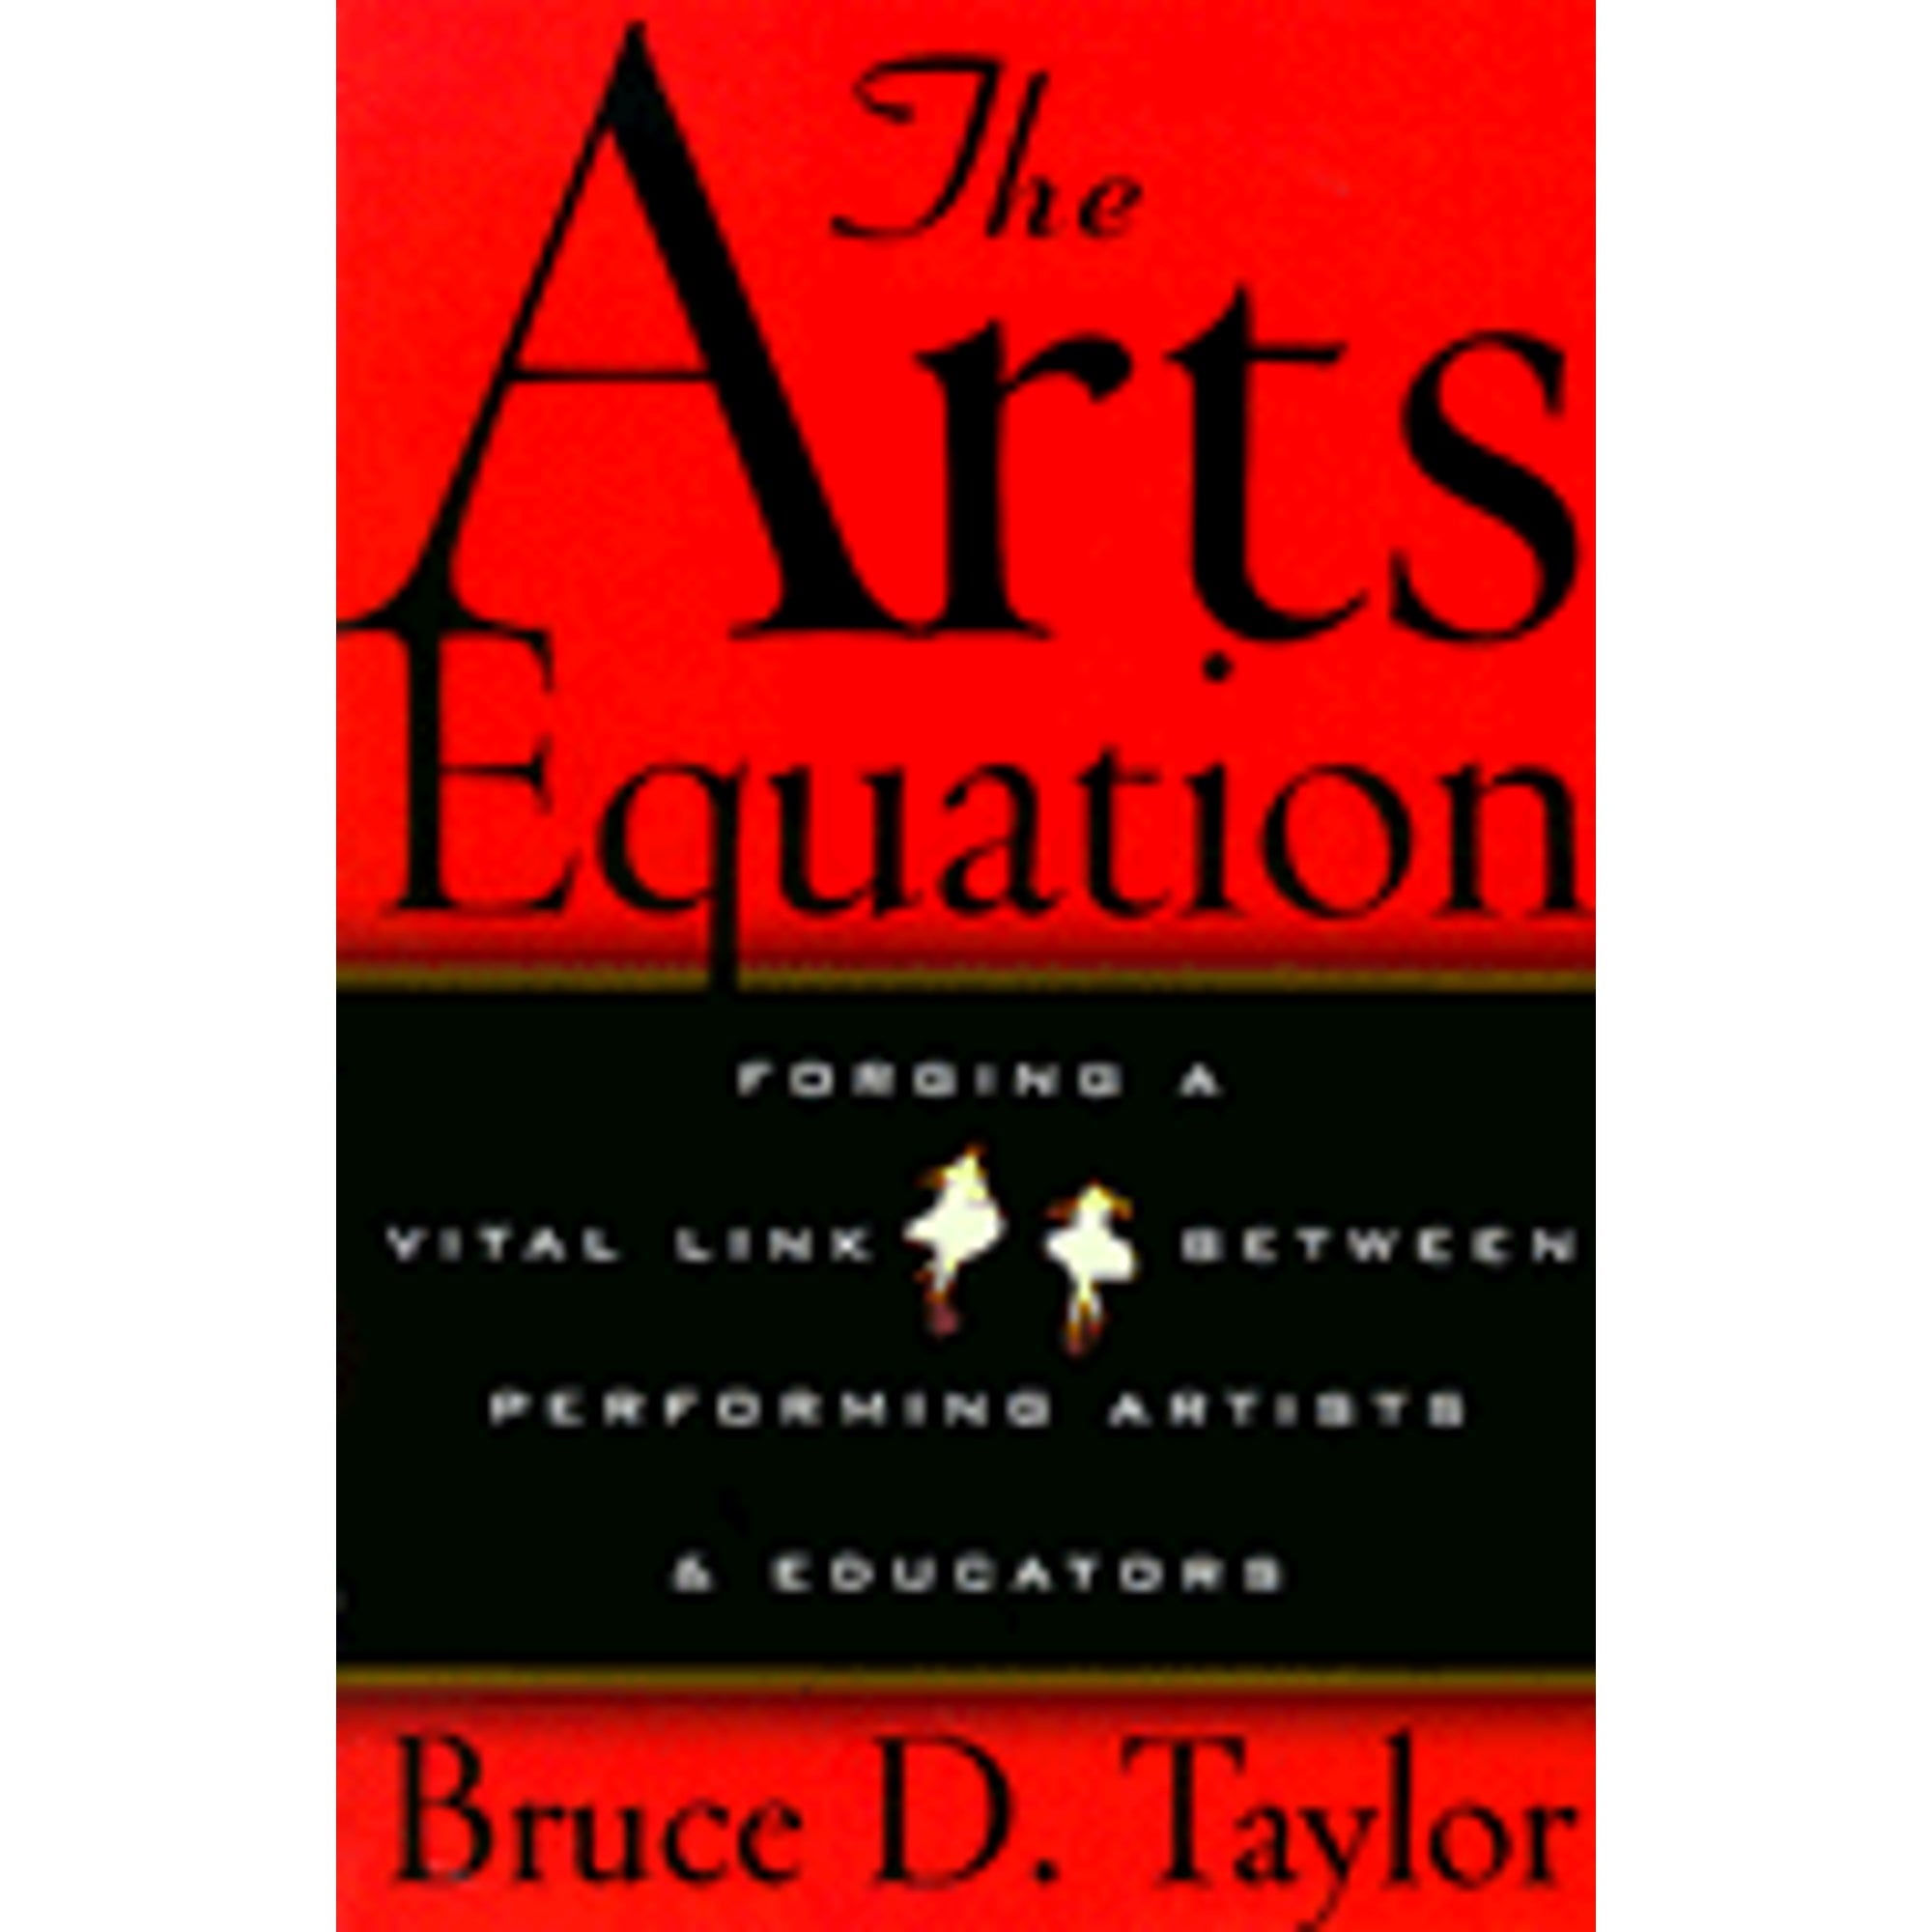 Pre-Owned The Arts Equation: Forging a Vital Link Between Performing Artists and Educators (Paperback 9780823088058) by Bruce D Taylor